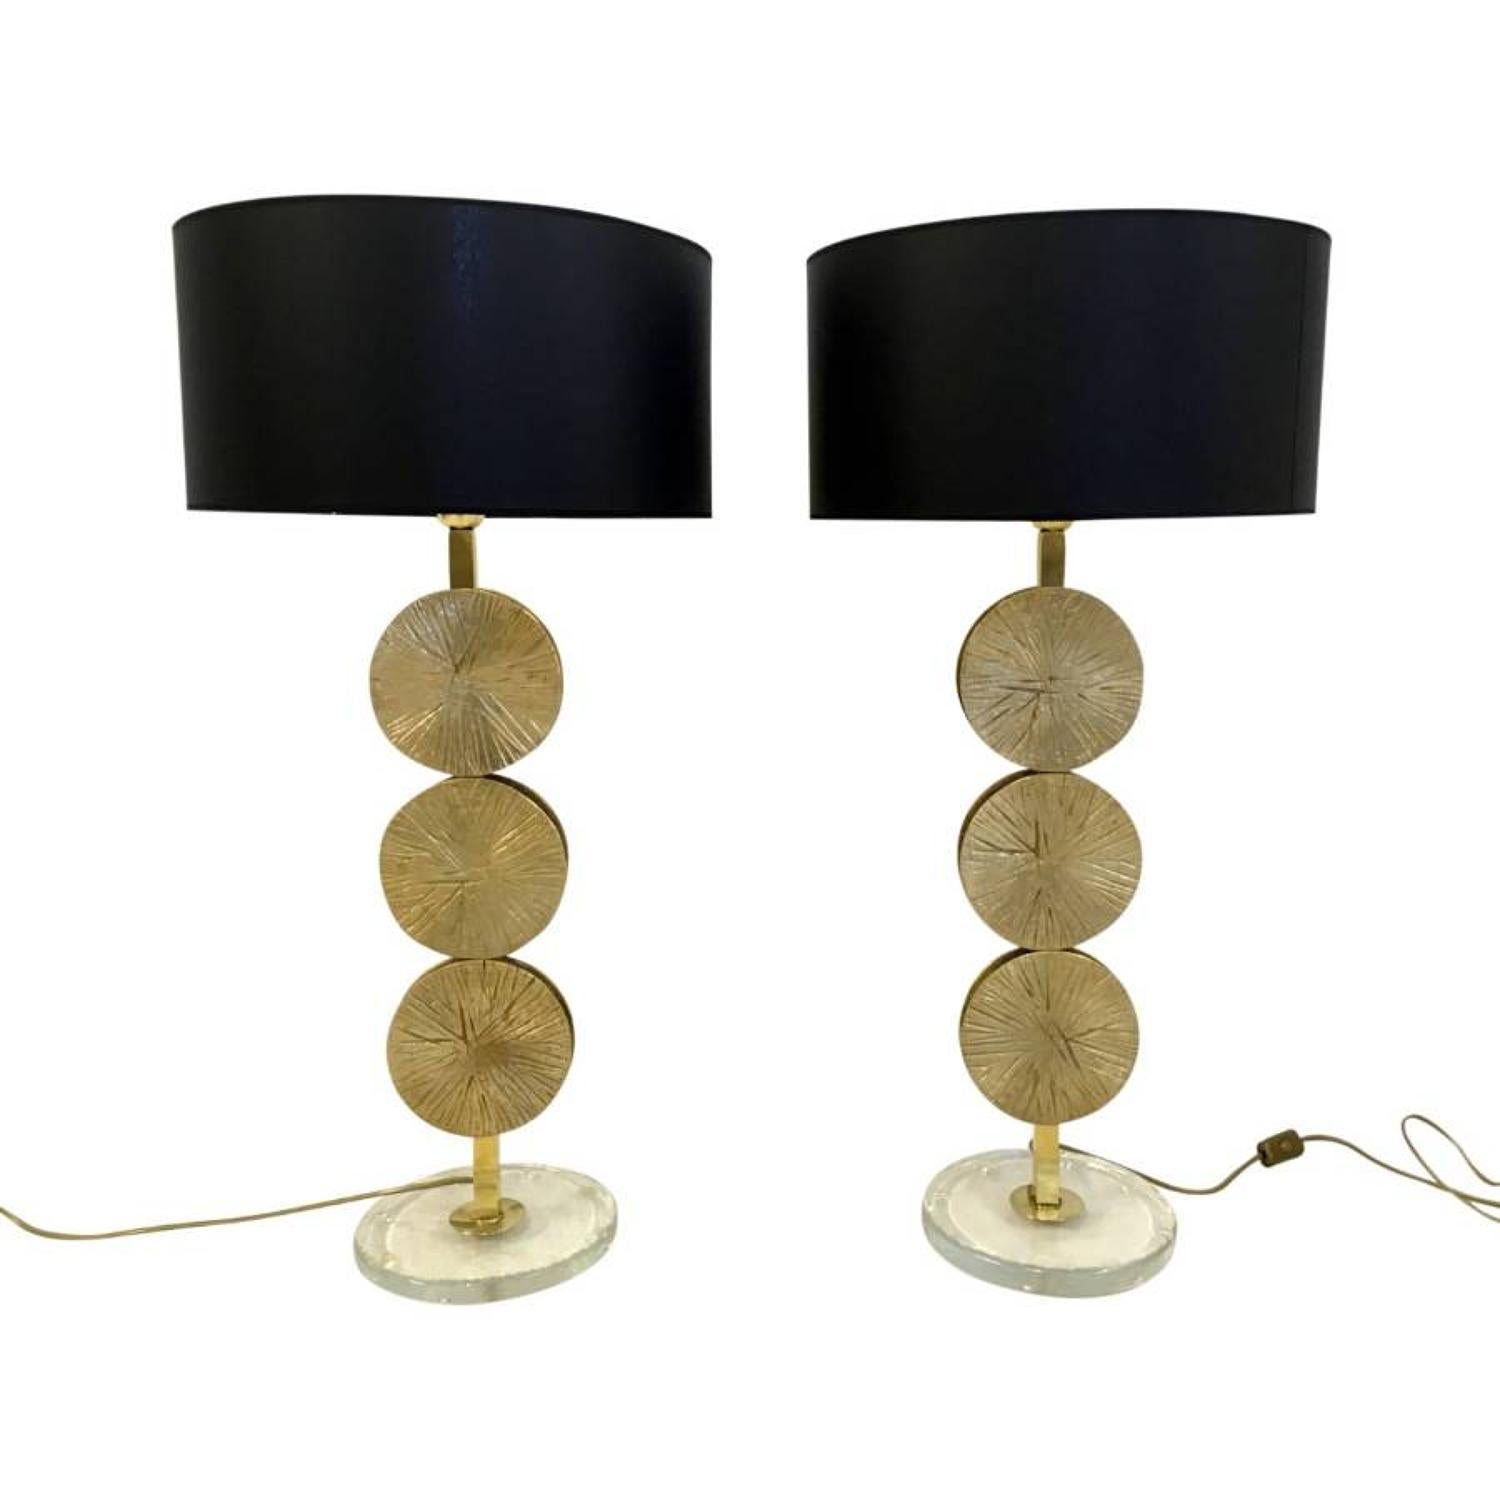 Pair of brass table lamps

Murano glass disc base

Contemporary

Made in a small workshop close to Venice, Italy

Shades not included.